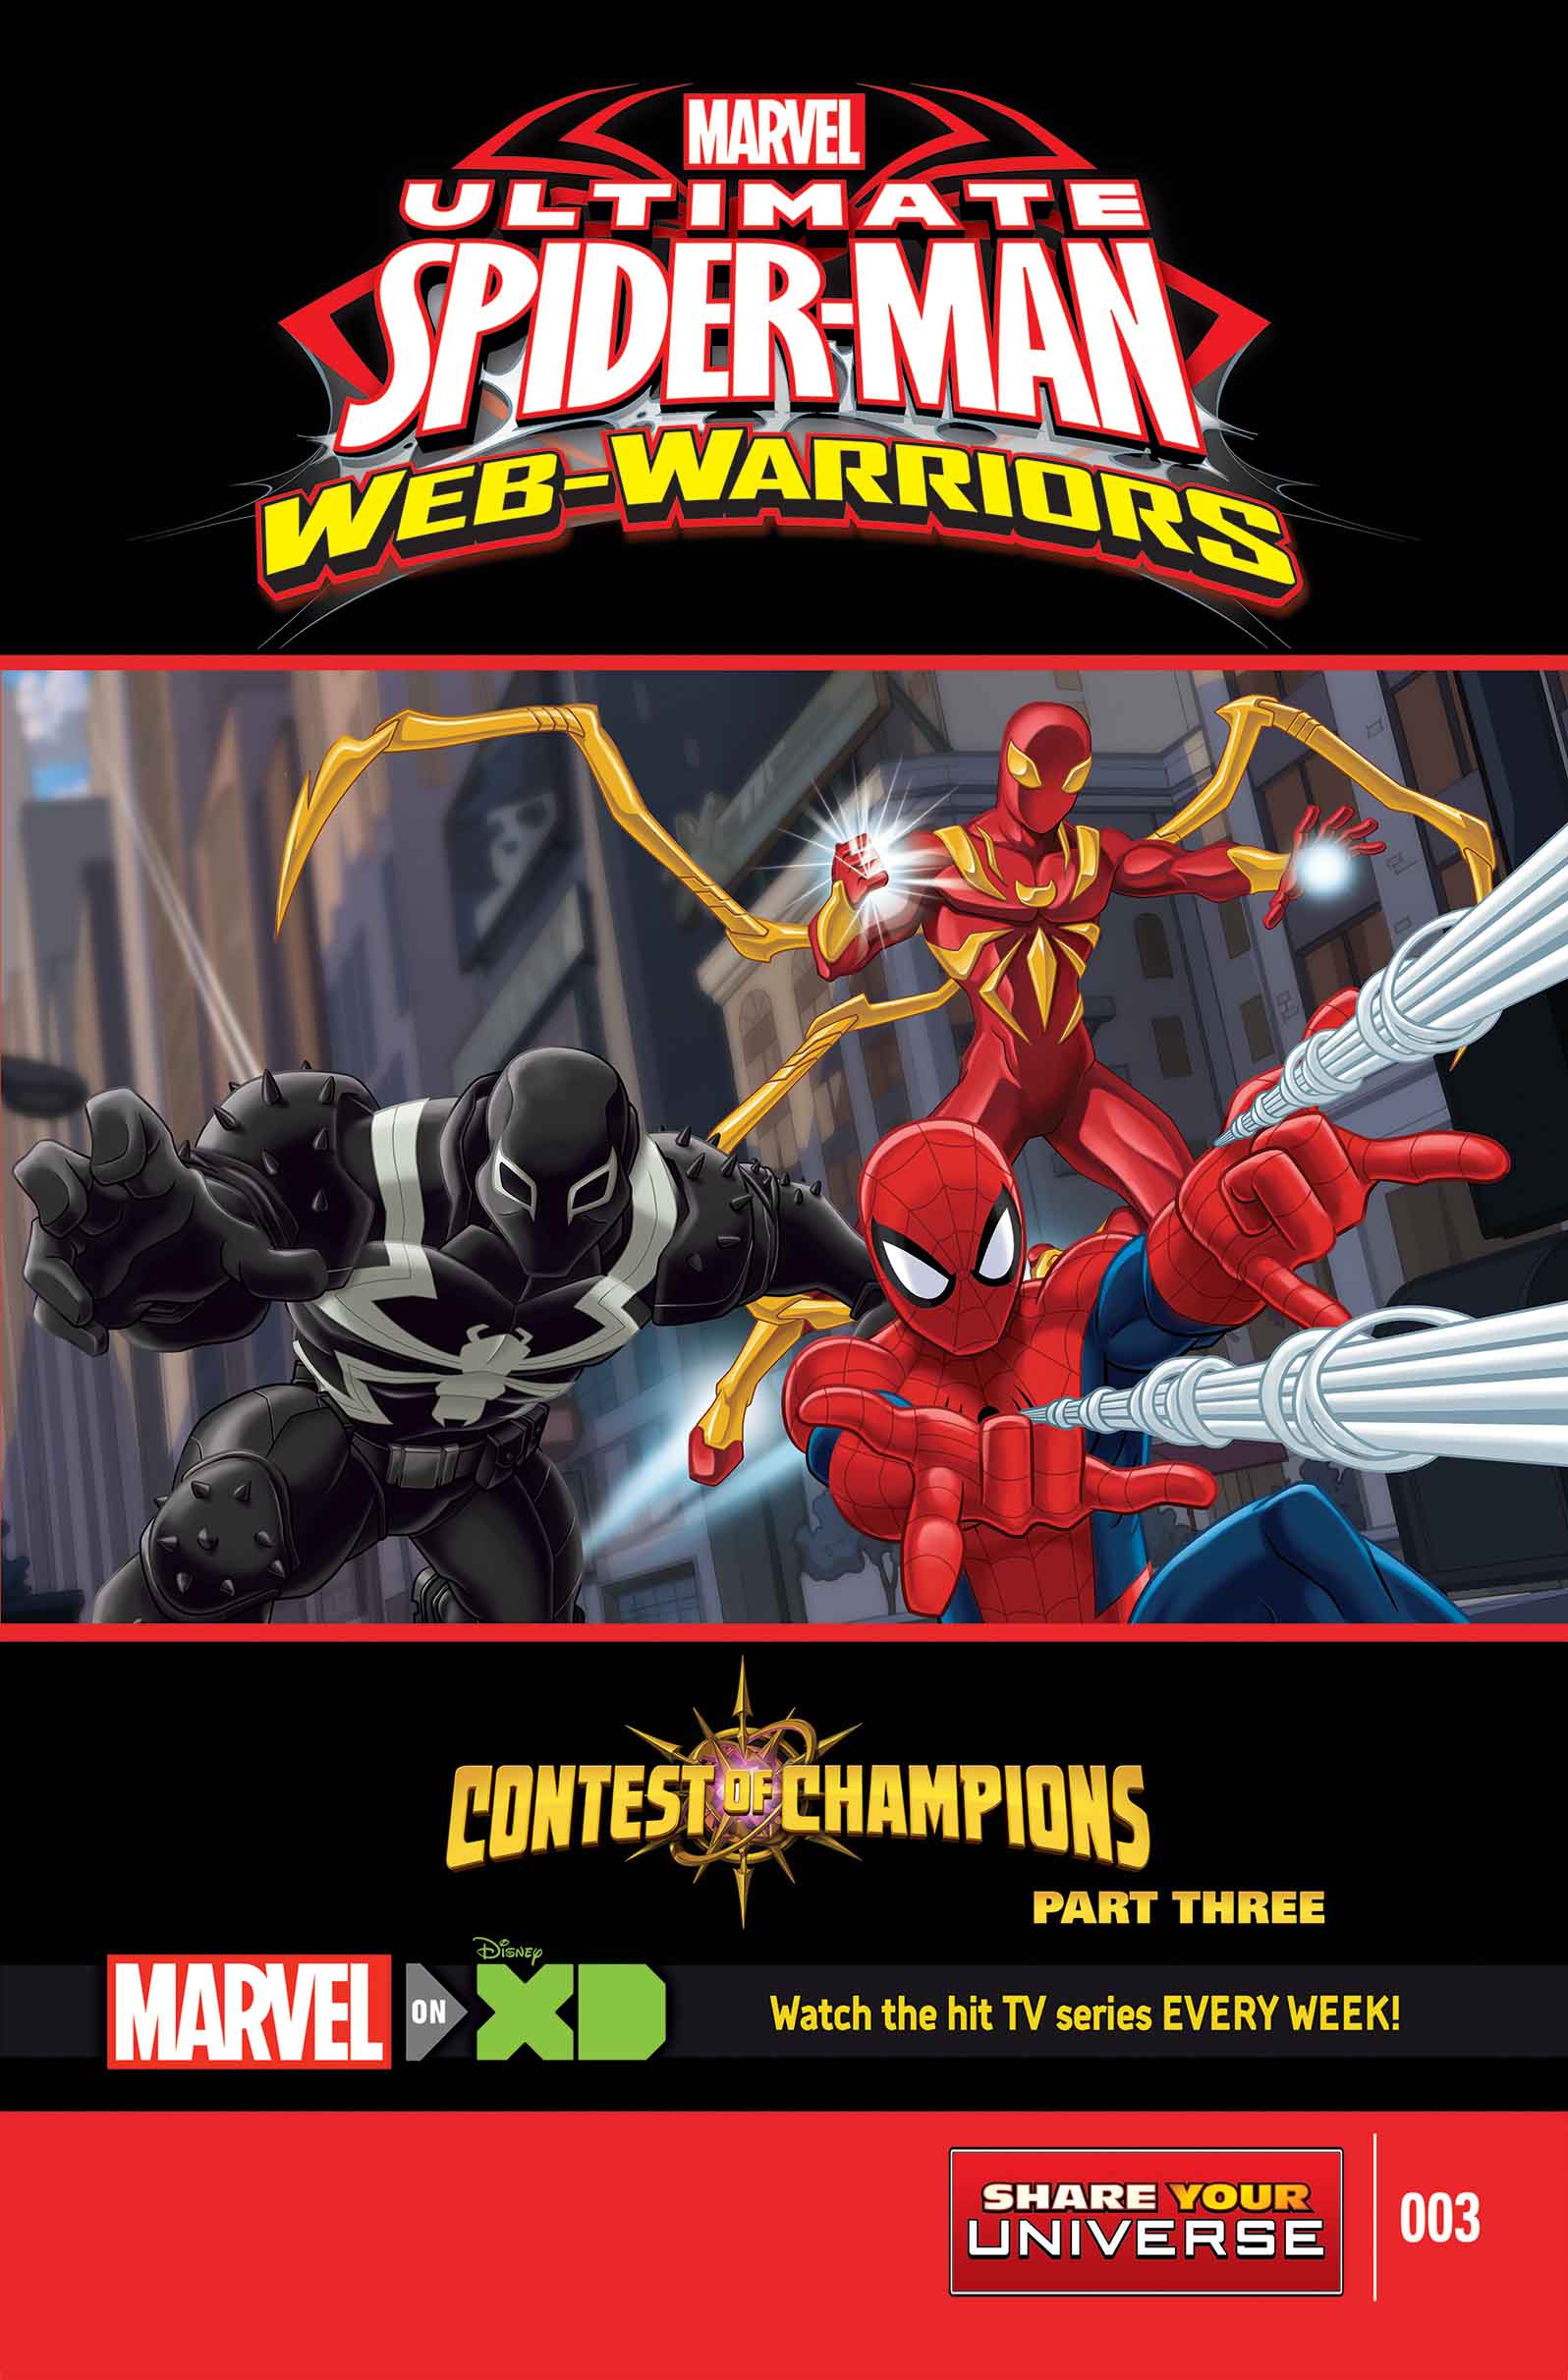 MARVEL UNIVERSE ULTIMATE SPIDER-MAN: CONTEST OF CHAMPIONS #3